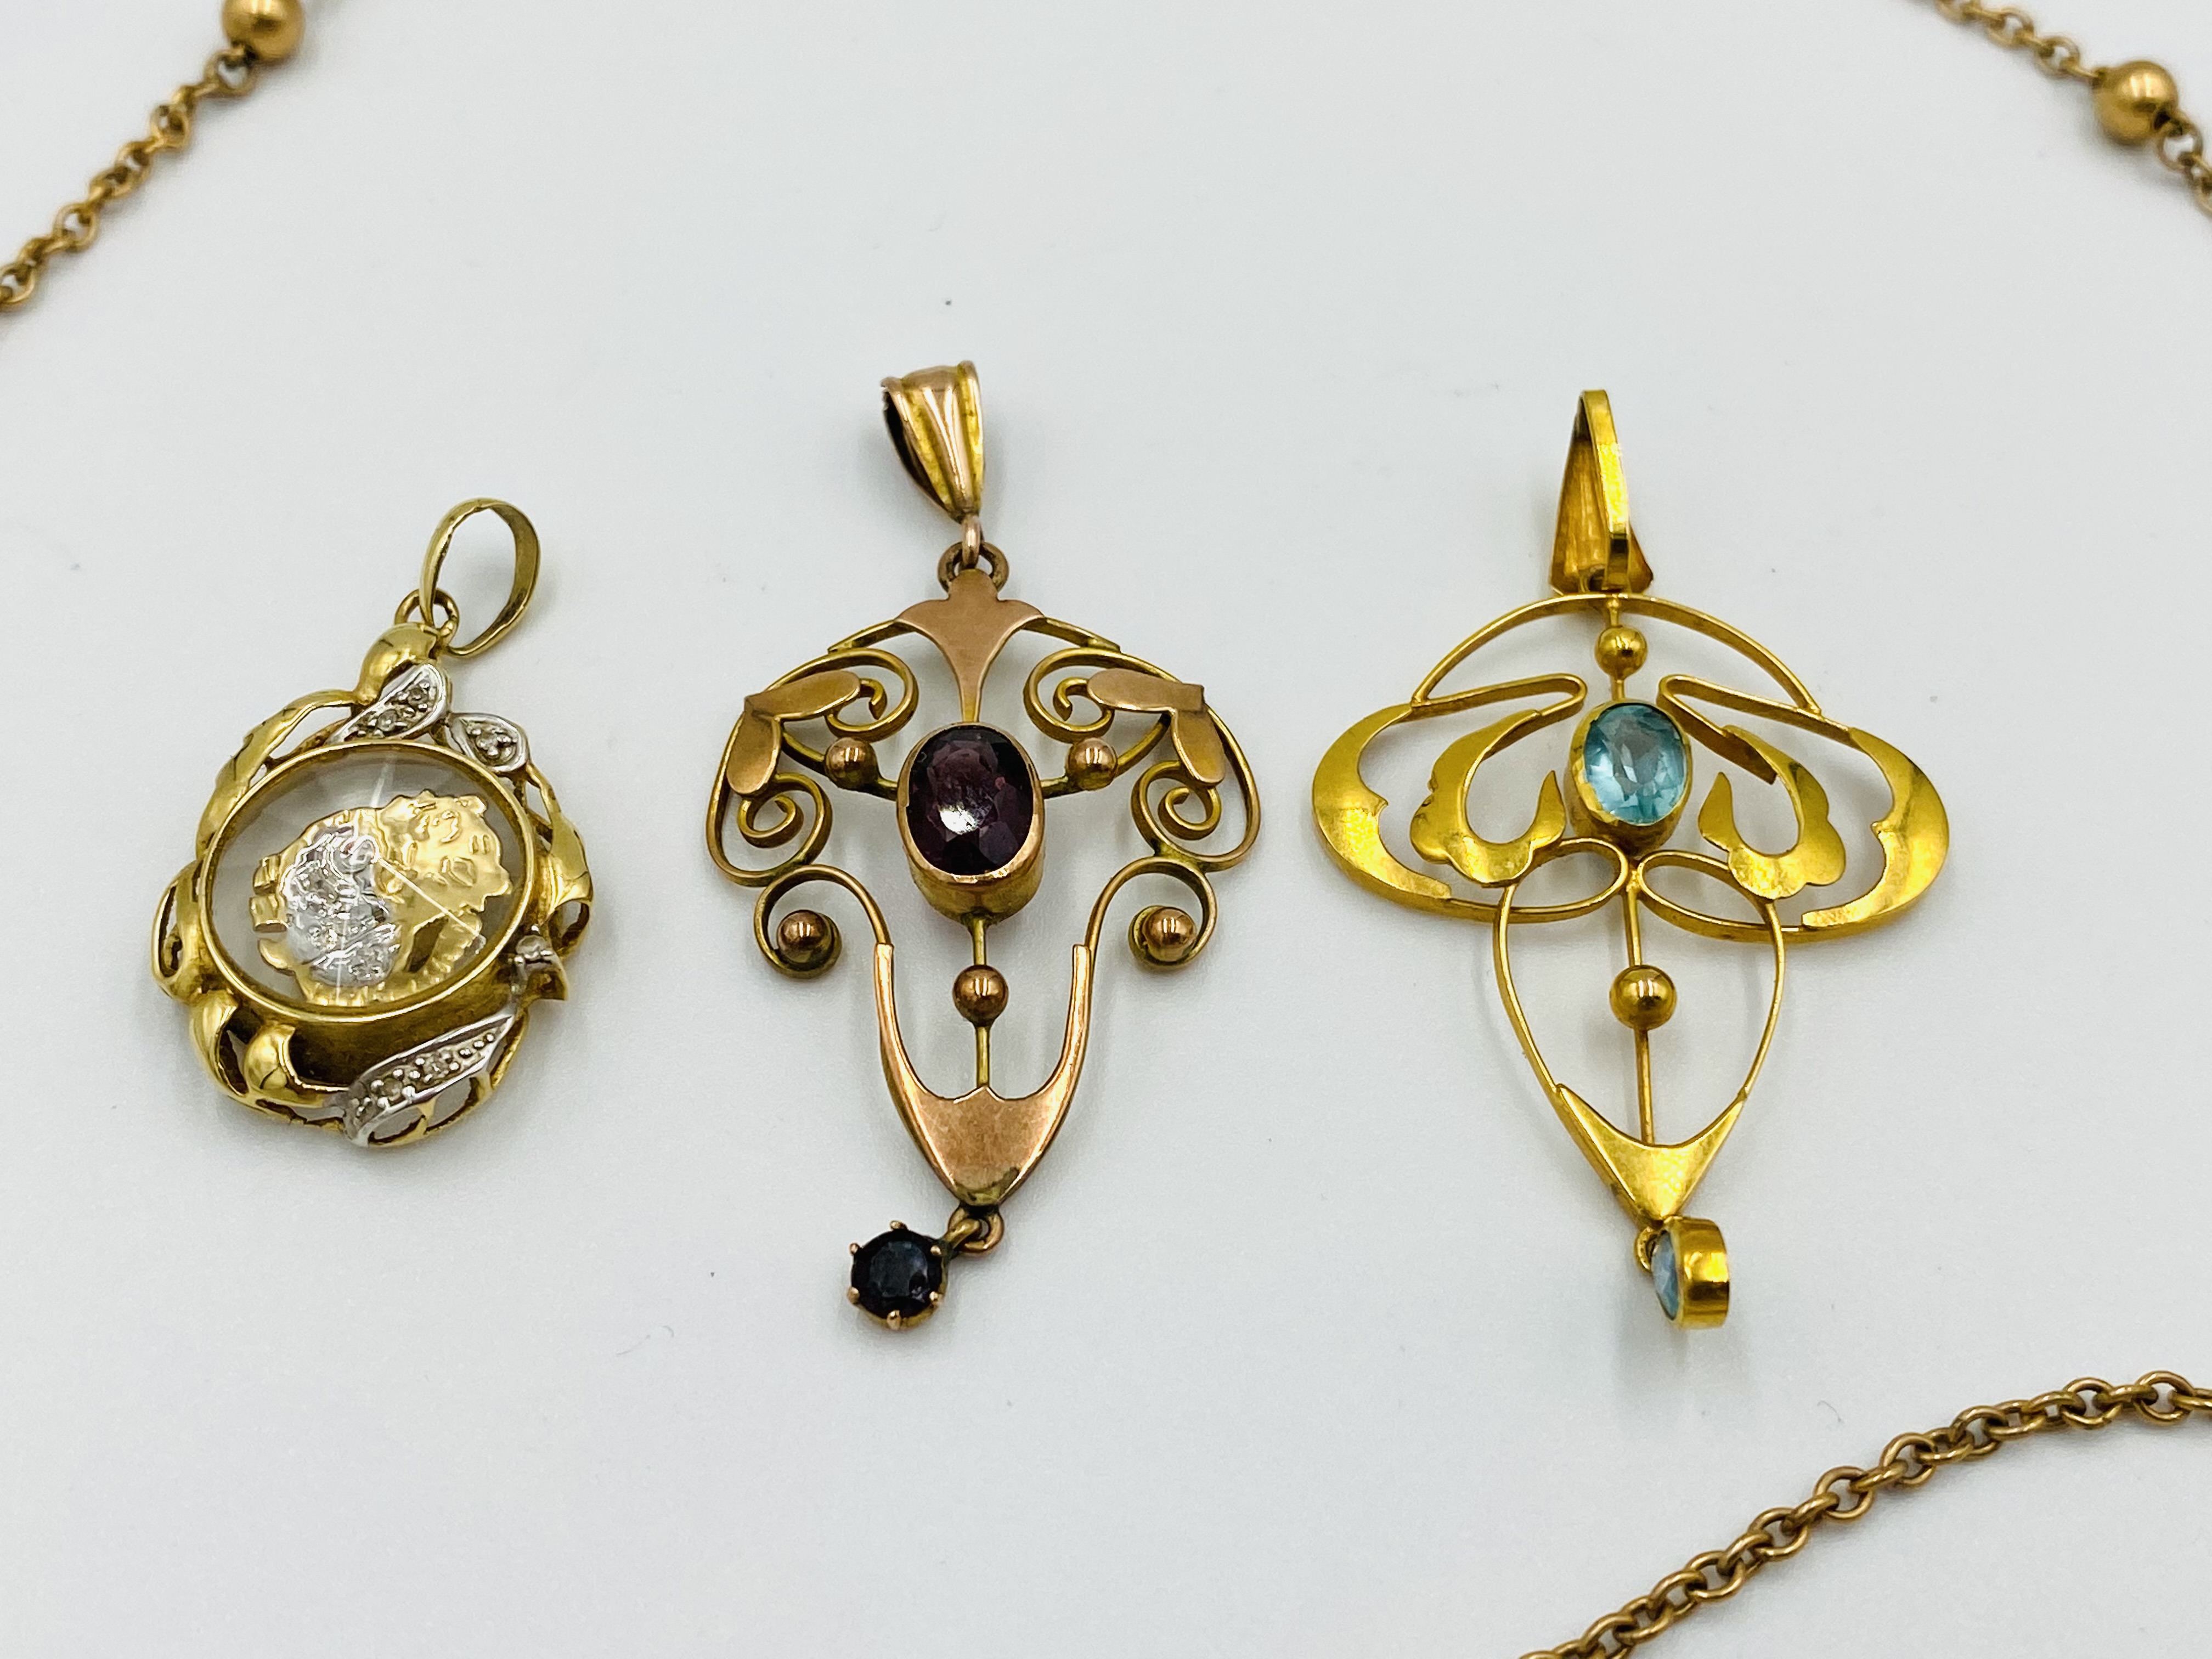 18ct gold and diamond pendant together with two 9ct gold pendants - Image 2 of 6